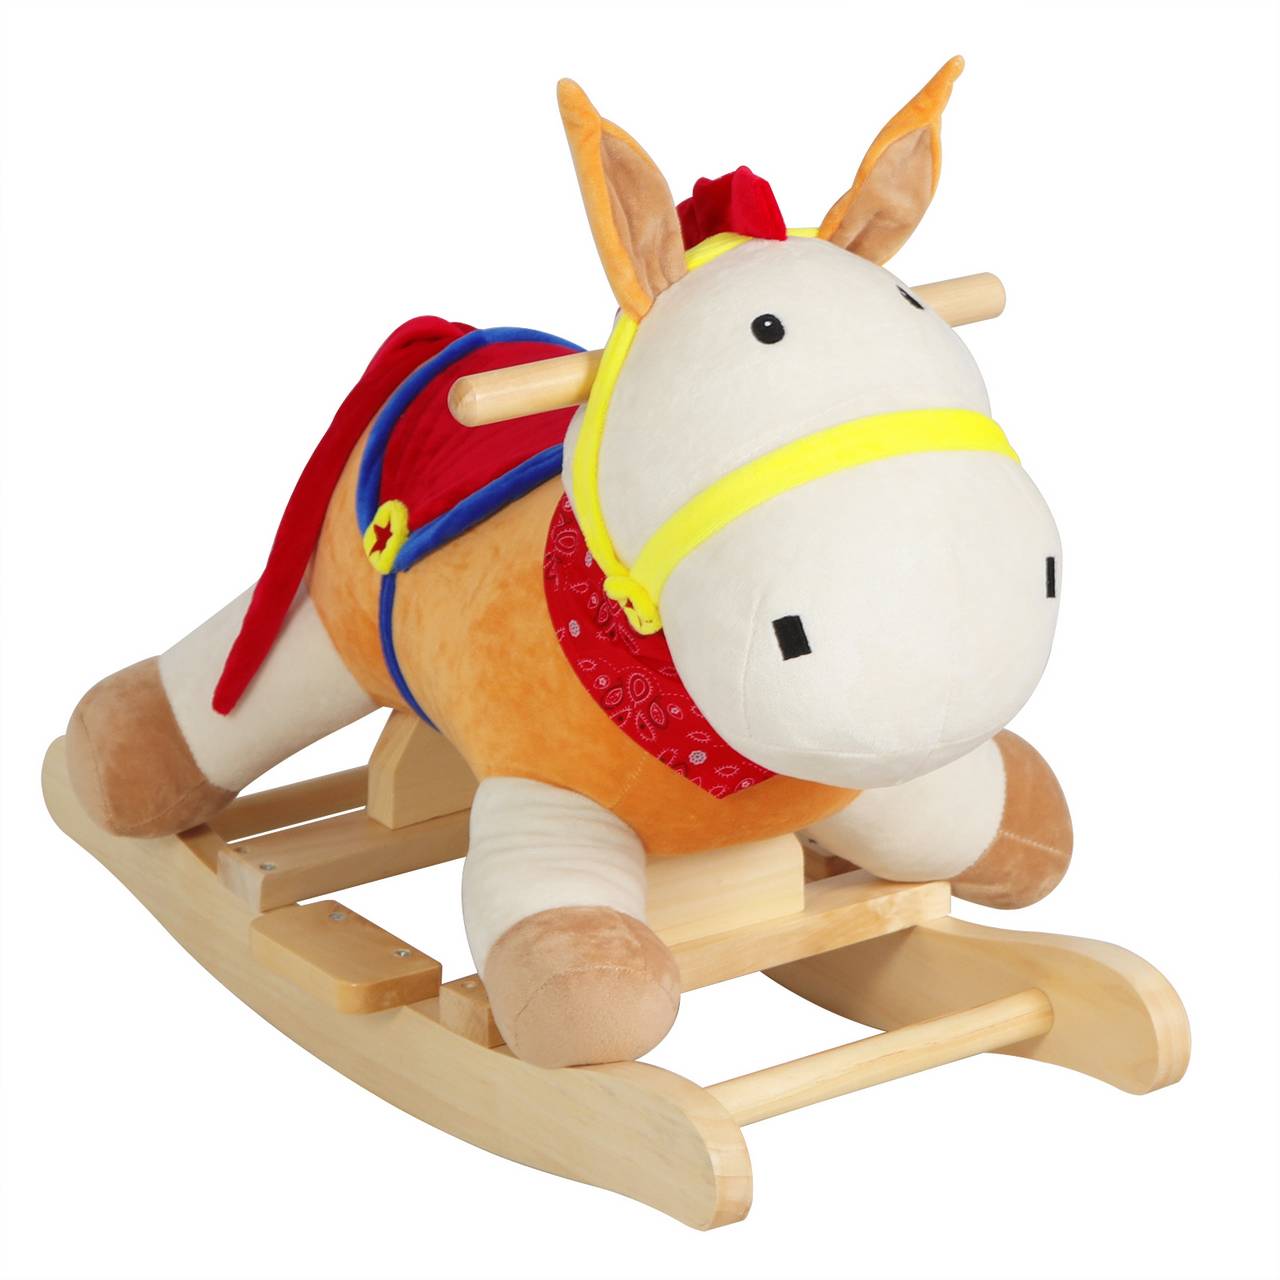 Rocking horse rocking animal with sound handles for baby 18-36 months plush  